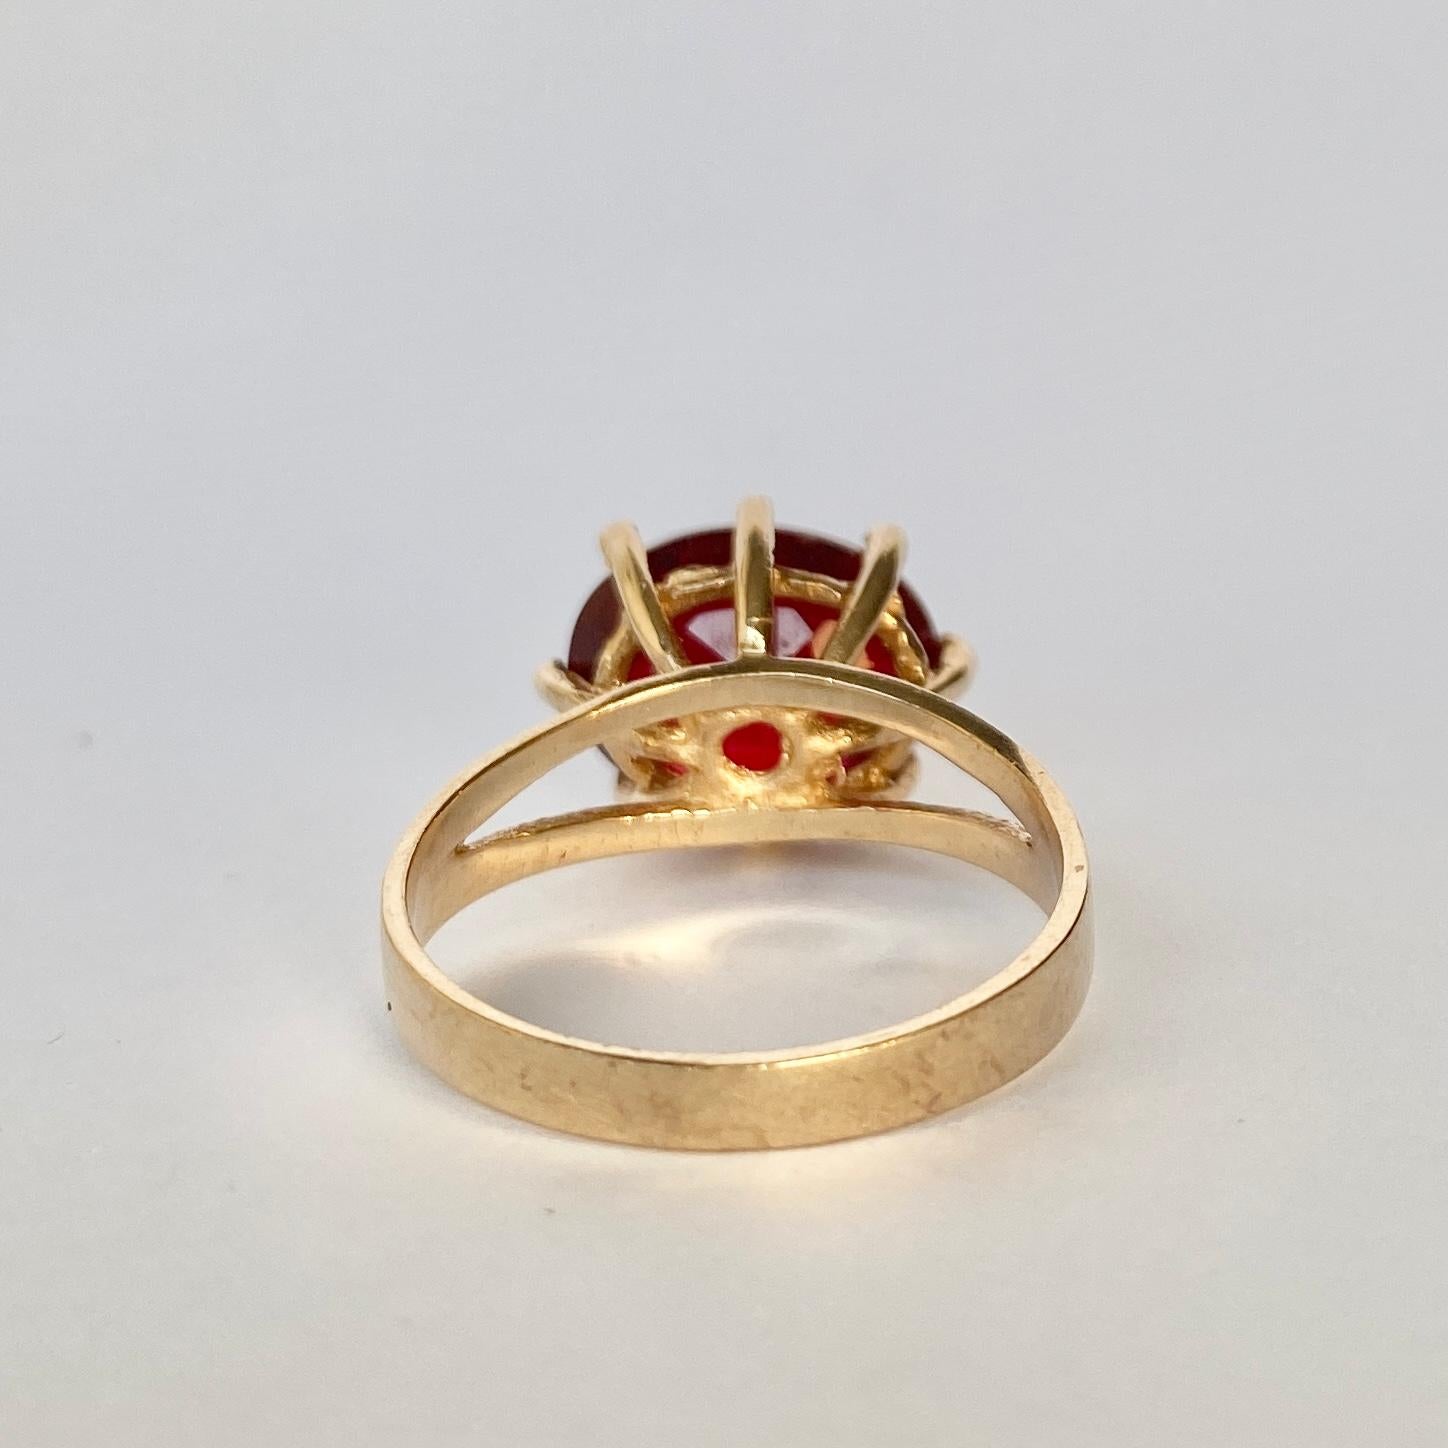 This deep red garnet stone has a rich red glow when the light hits it. The stone is set up high in open claws. Modelled in 9ct gold. 

Ring Size: P or 7 3/4 
Stone Dimensions: 10x12mm
Height Off Finger: 8mm

Weight: 3.8g